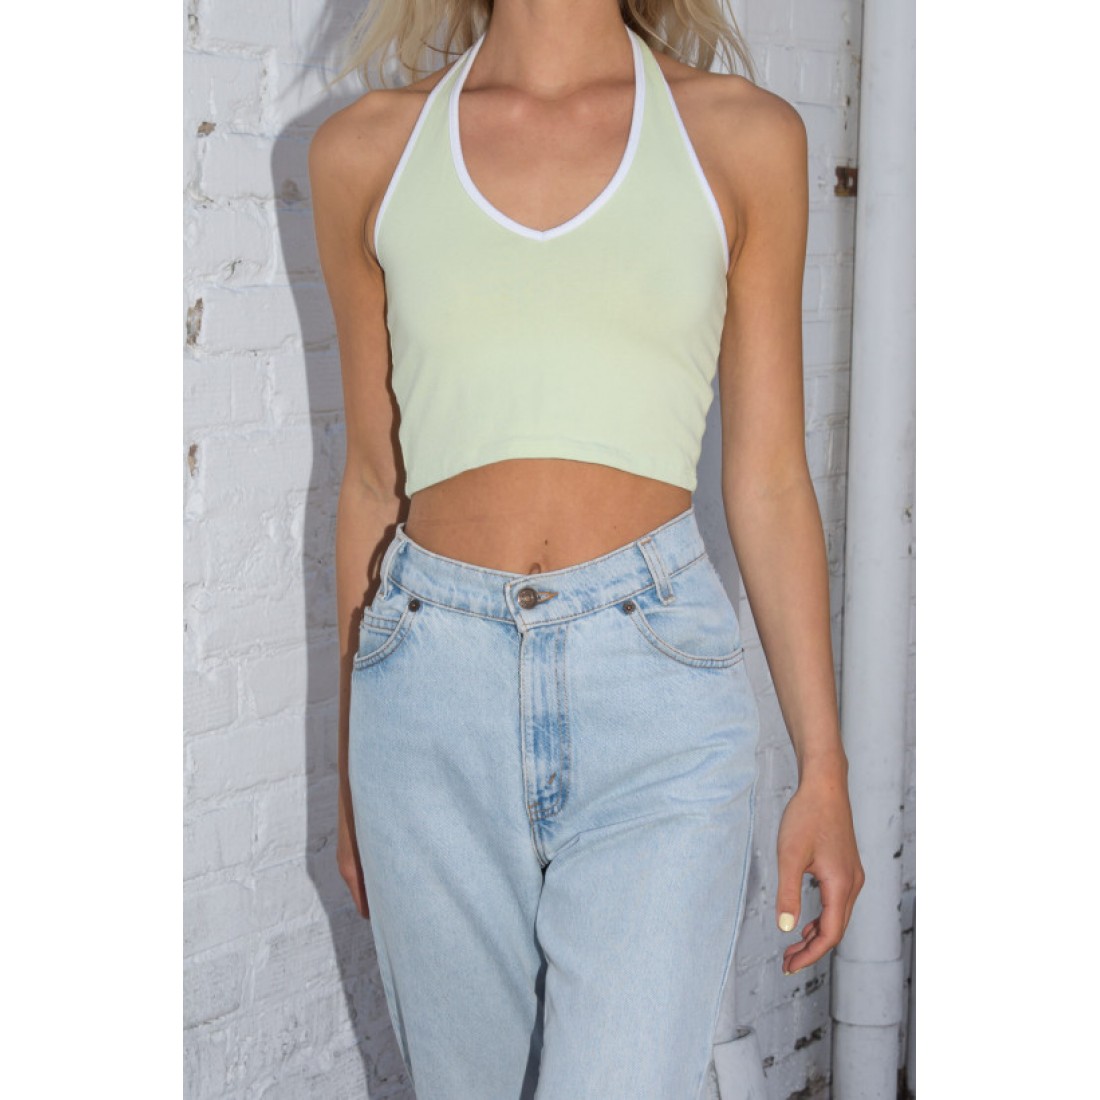 Browse our Online Sale Brandy Melville Alexis Halter Top On sale ...